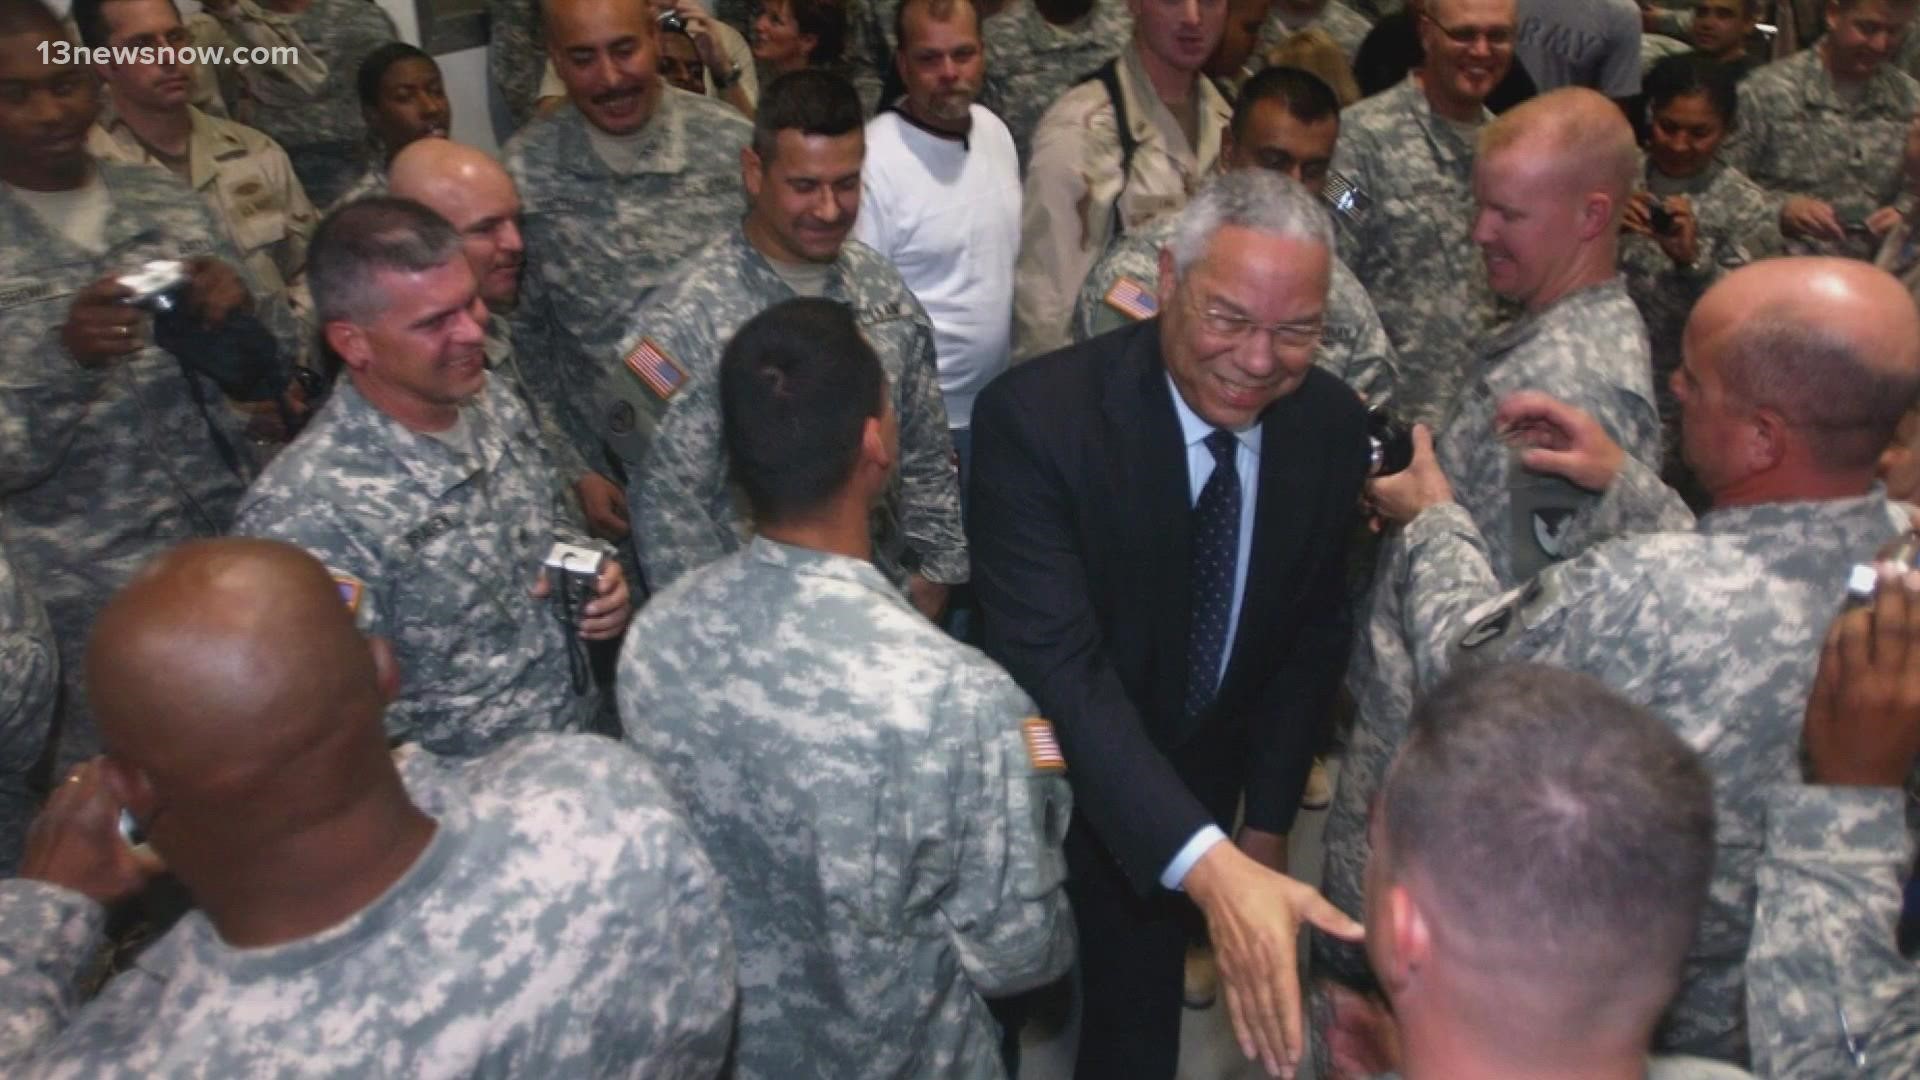 Tributes poured in on Monday after the announcement that Colin Powell had died at the age of 84.